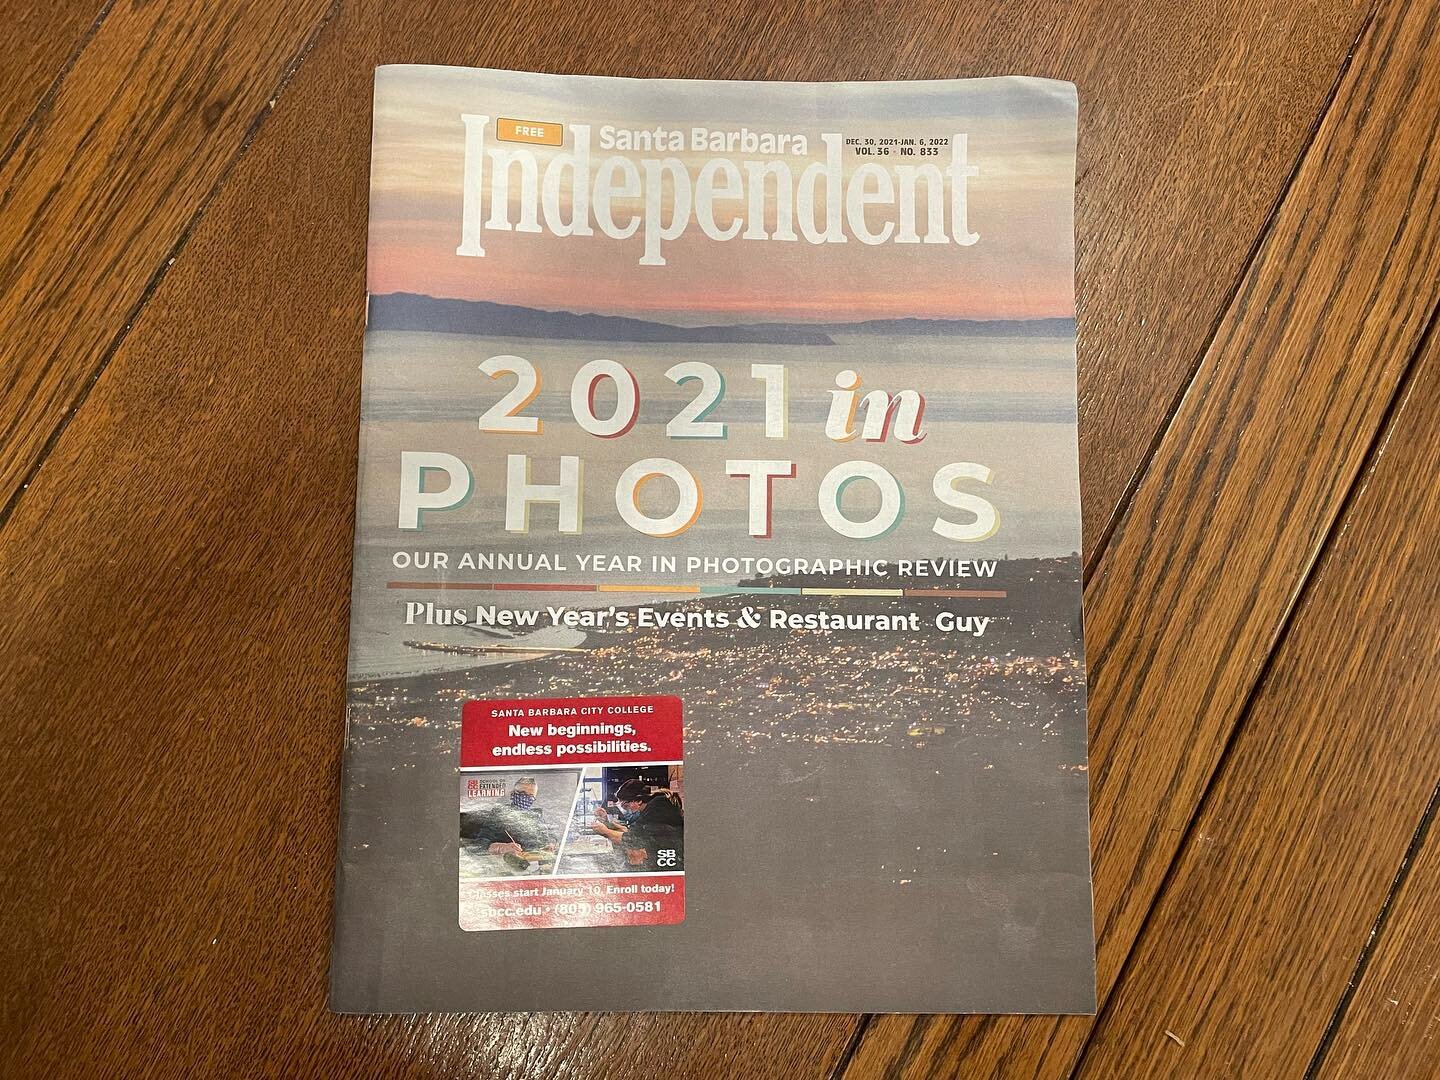 I&rsquo;m stoked for my photo to make the cover of the kick-ass @sbindependent Swipe for the full image. #happynewyear